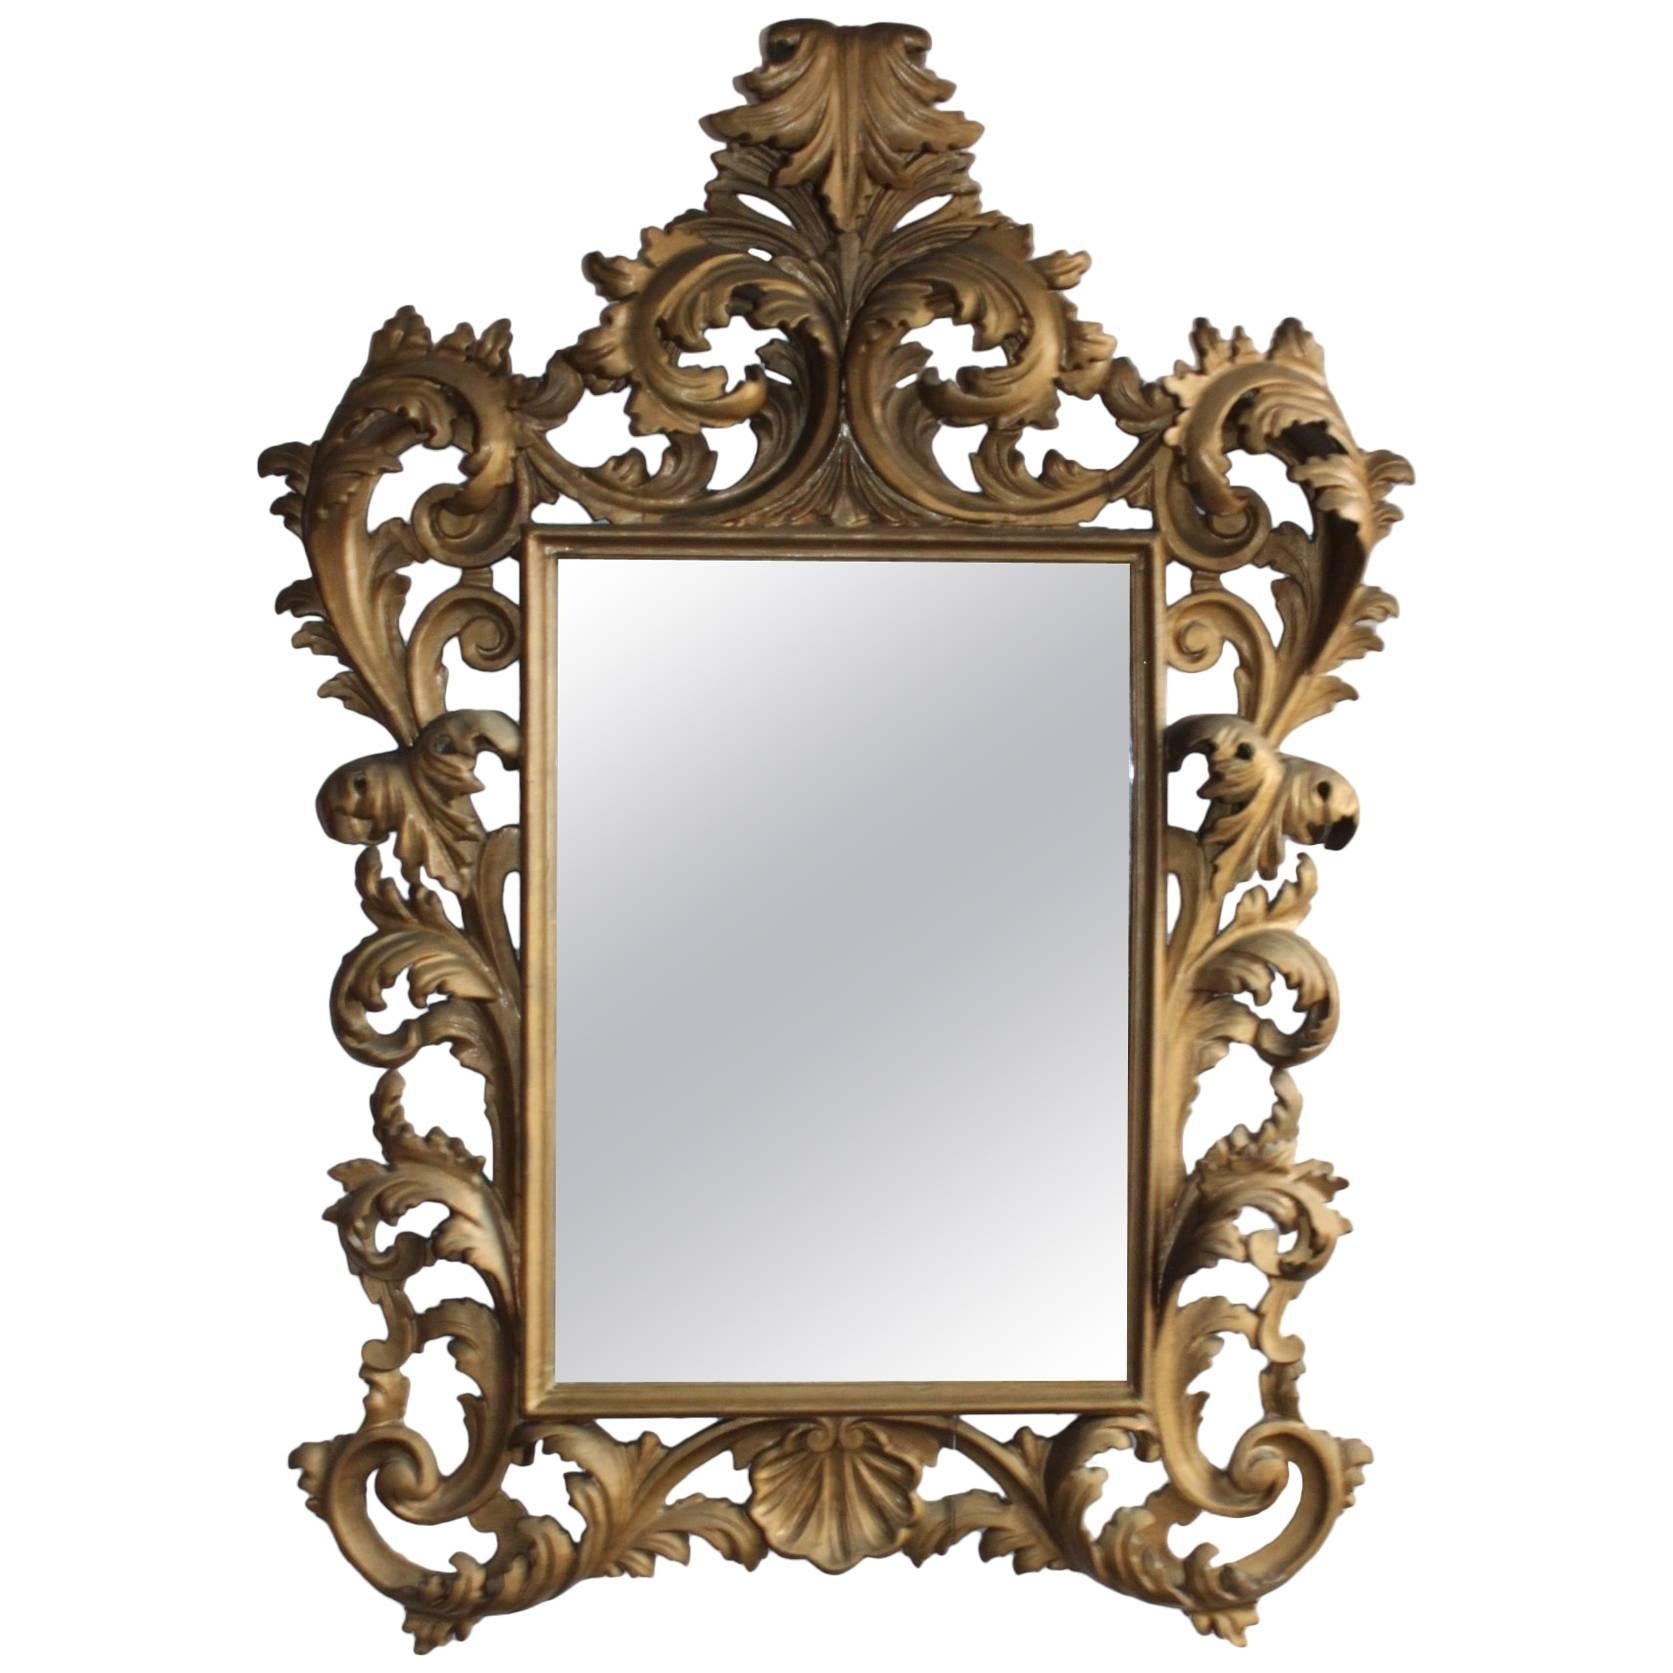 Rococo Italian Mirror with Carved Gold-Toned Frame and Acanthus Leaves